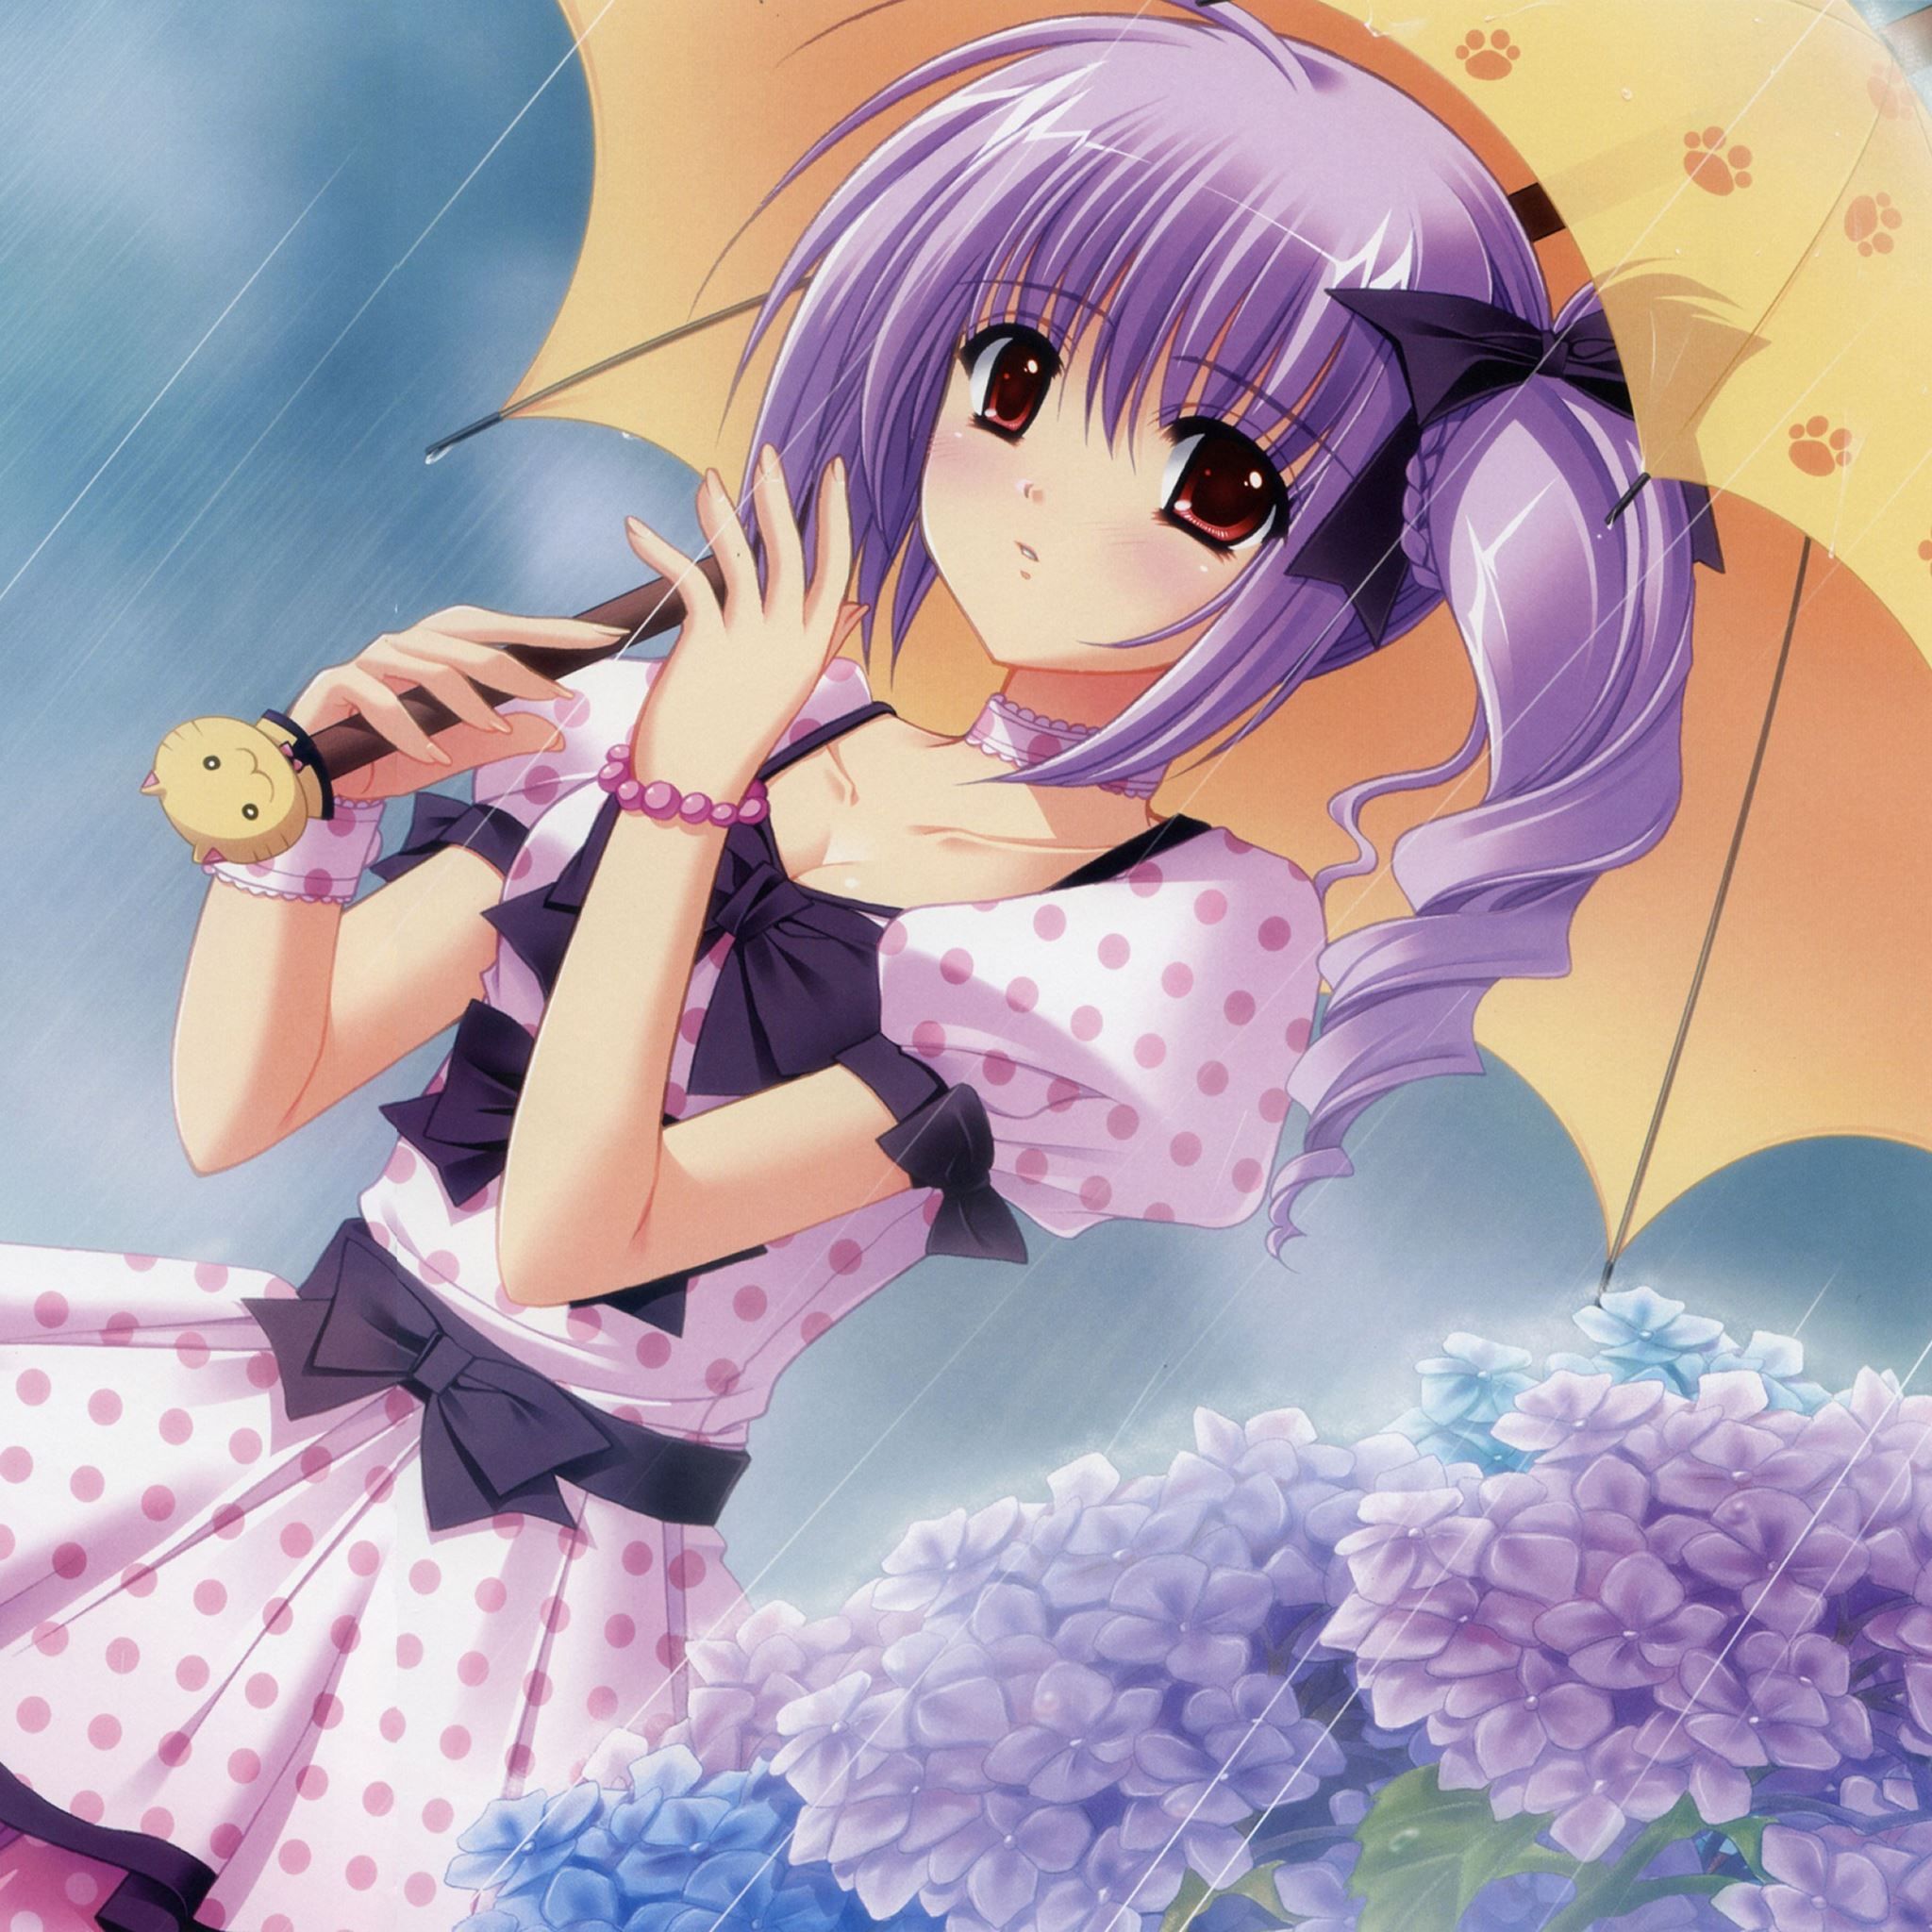 A purple haired anime girl with a cute pink dress holding a yellow umbrella. - Anime girl